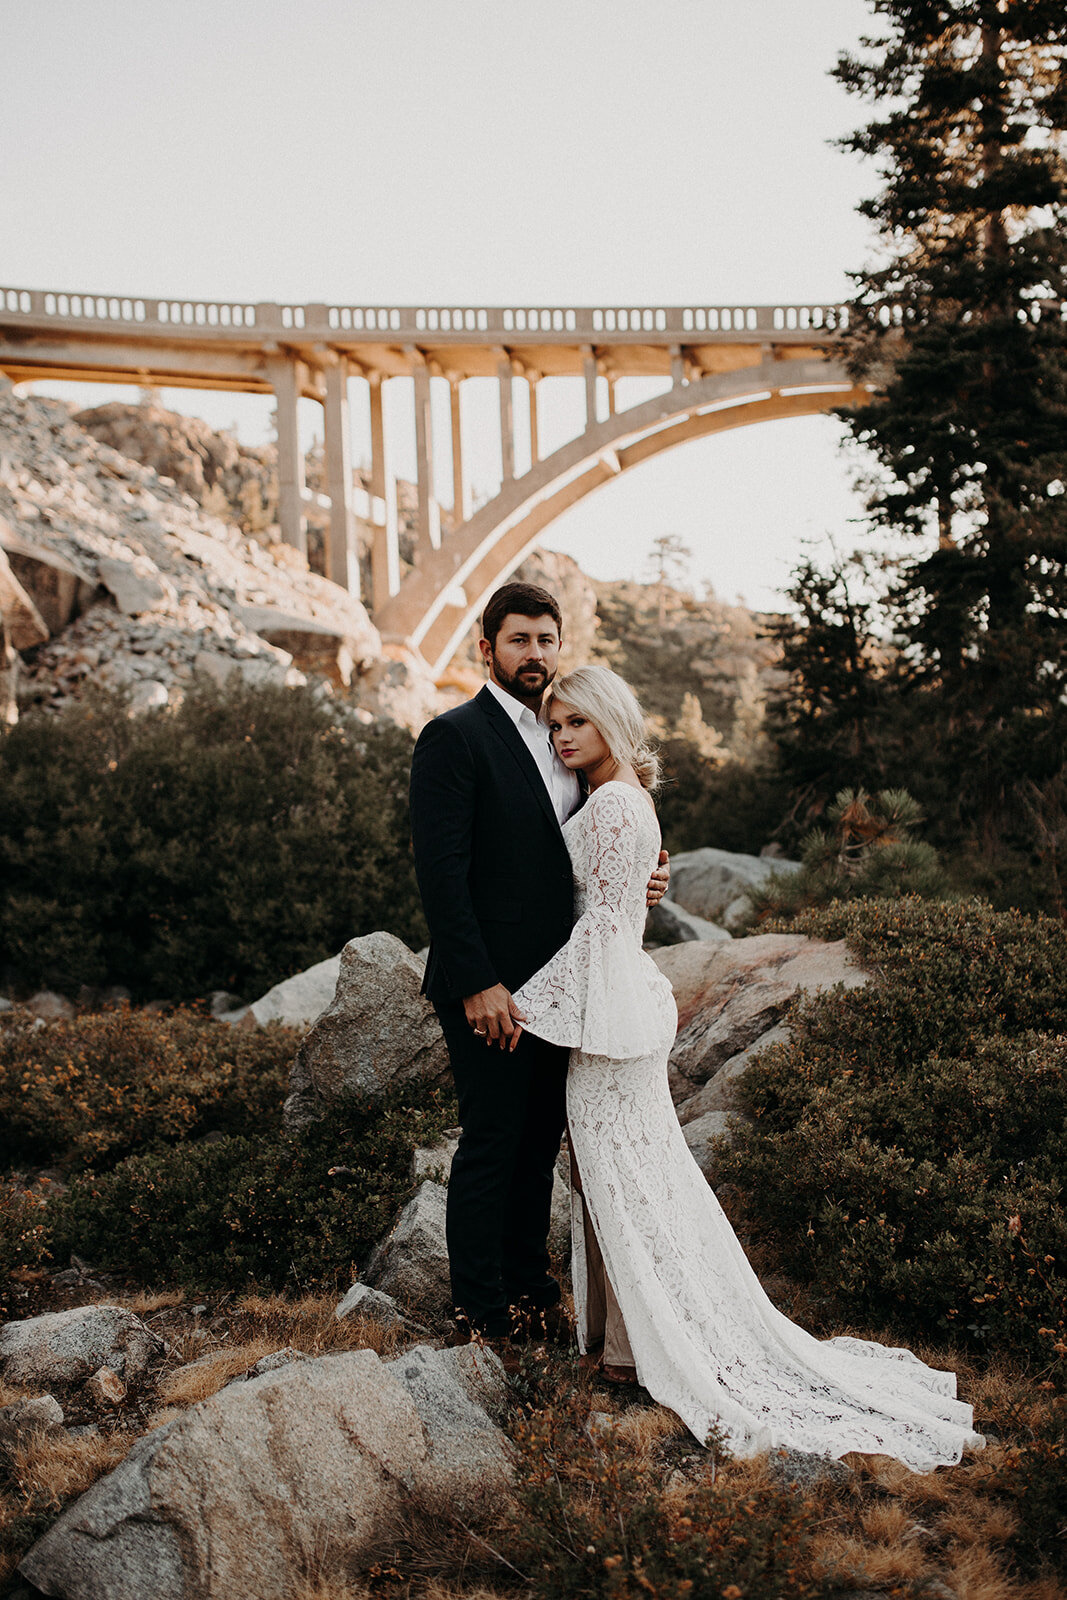 bride and groom embracing each other under a stunning bridge